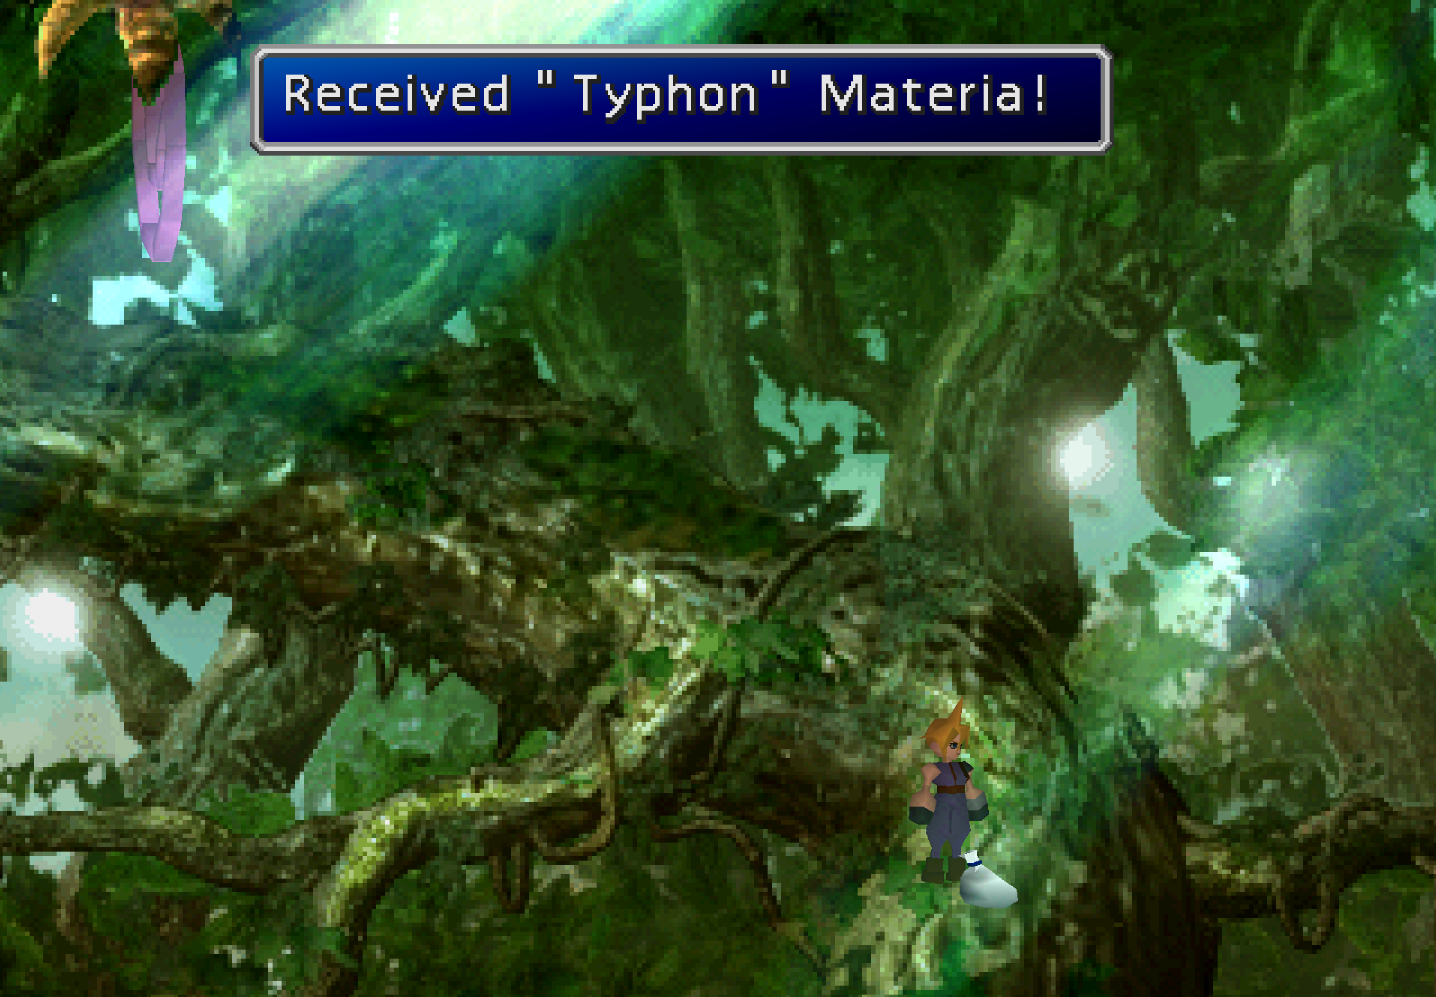 Typhon Materia Acquired